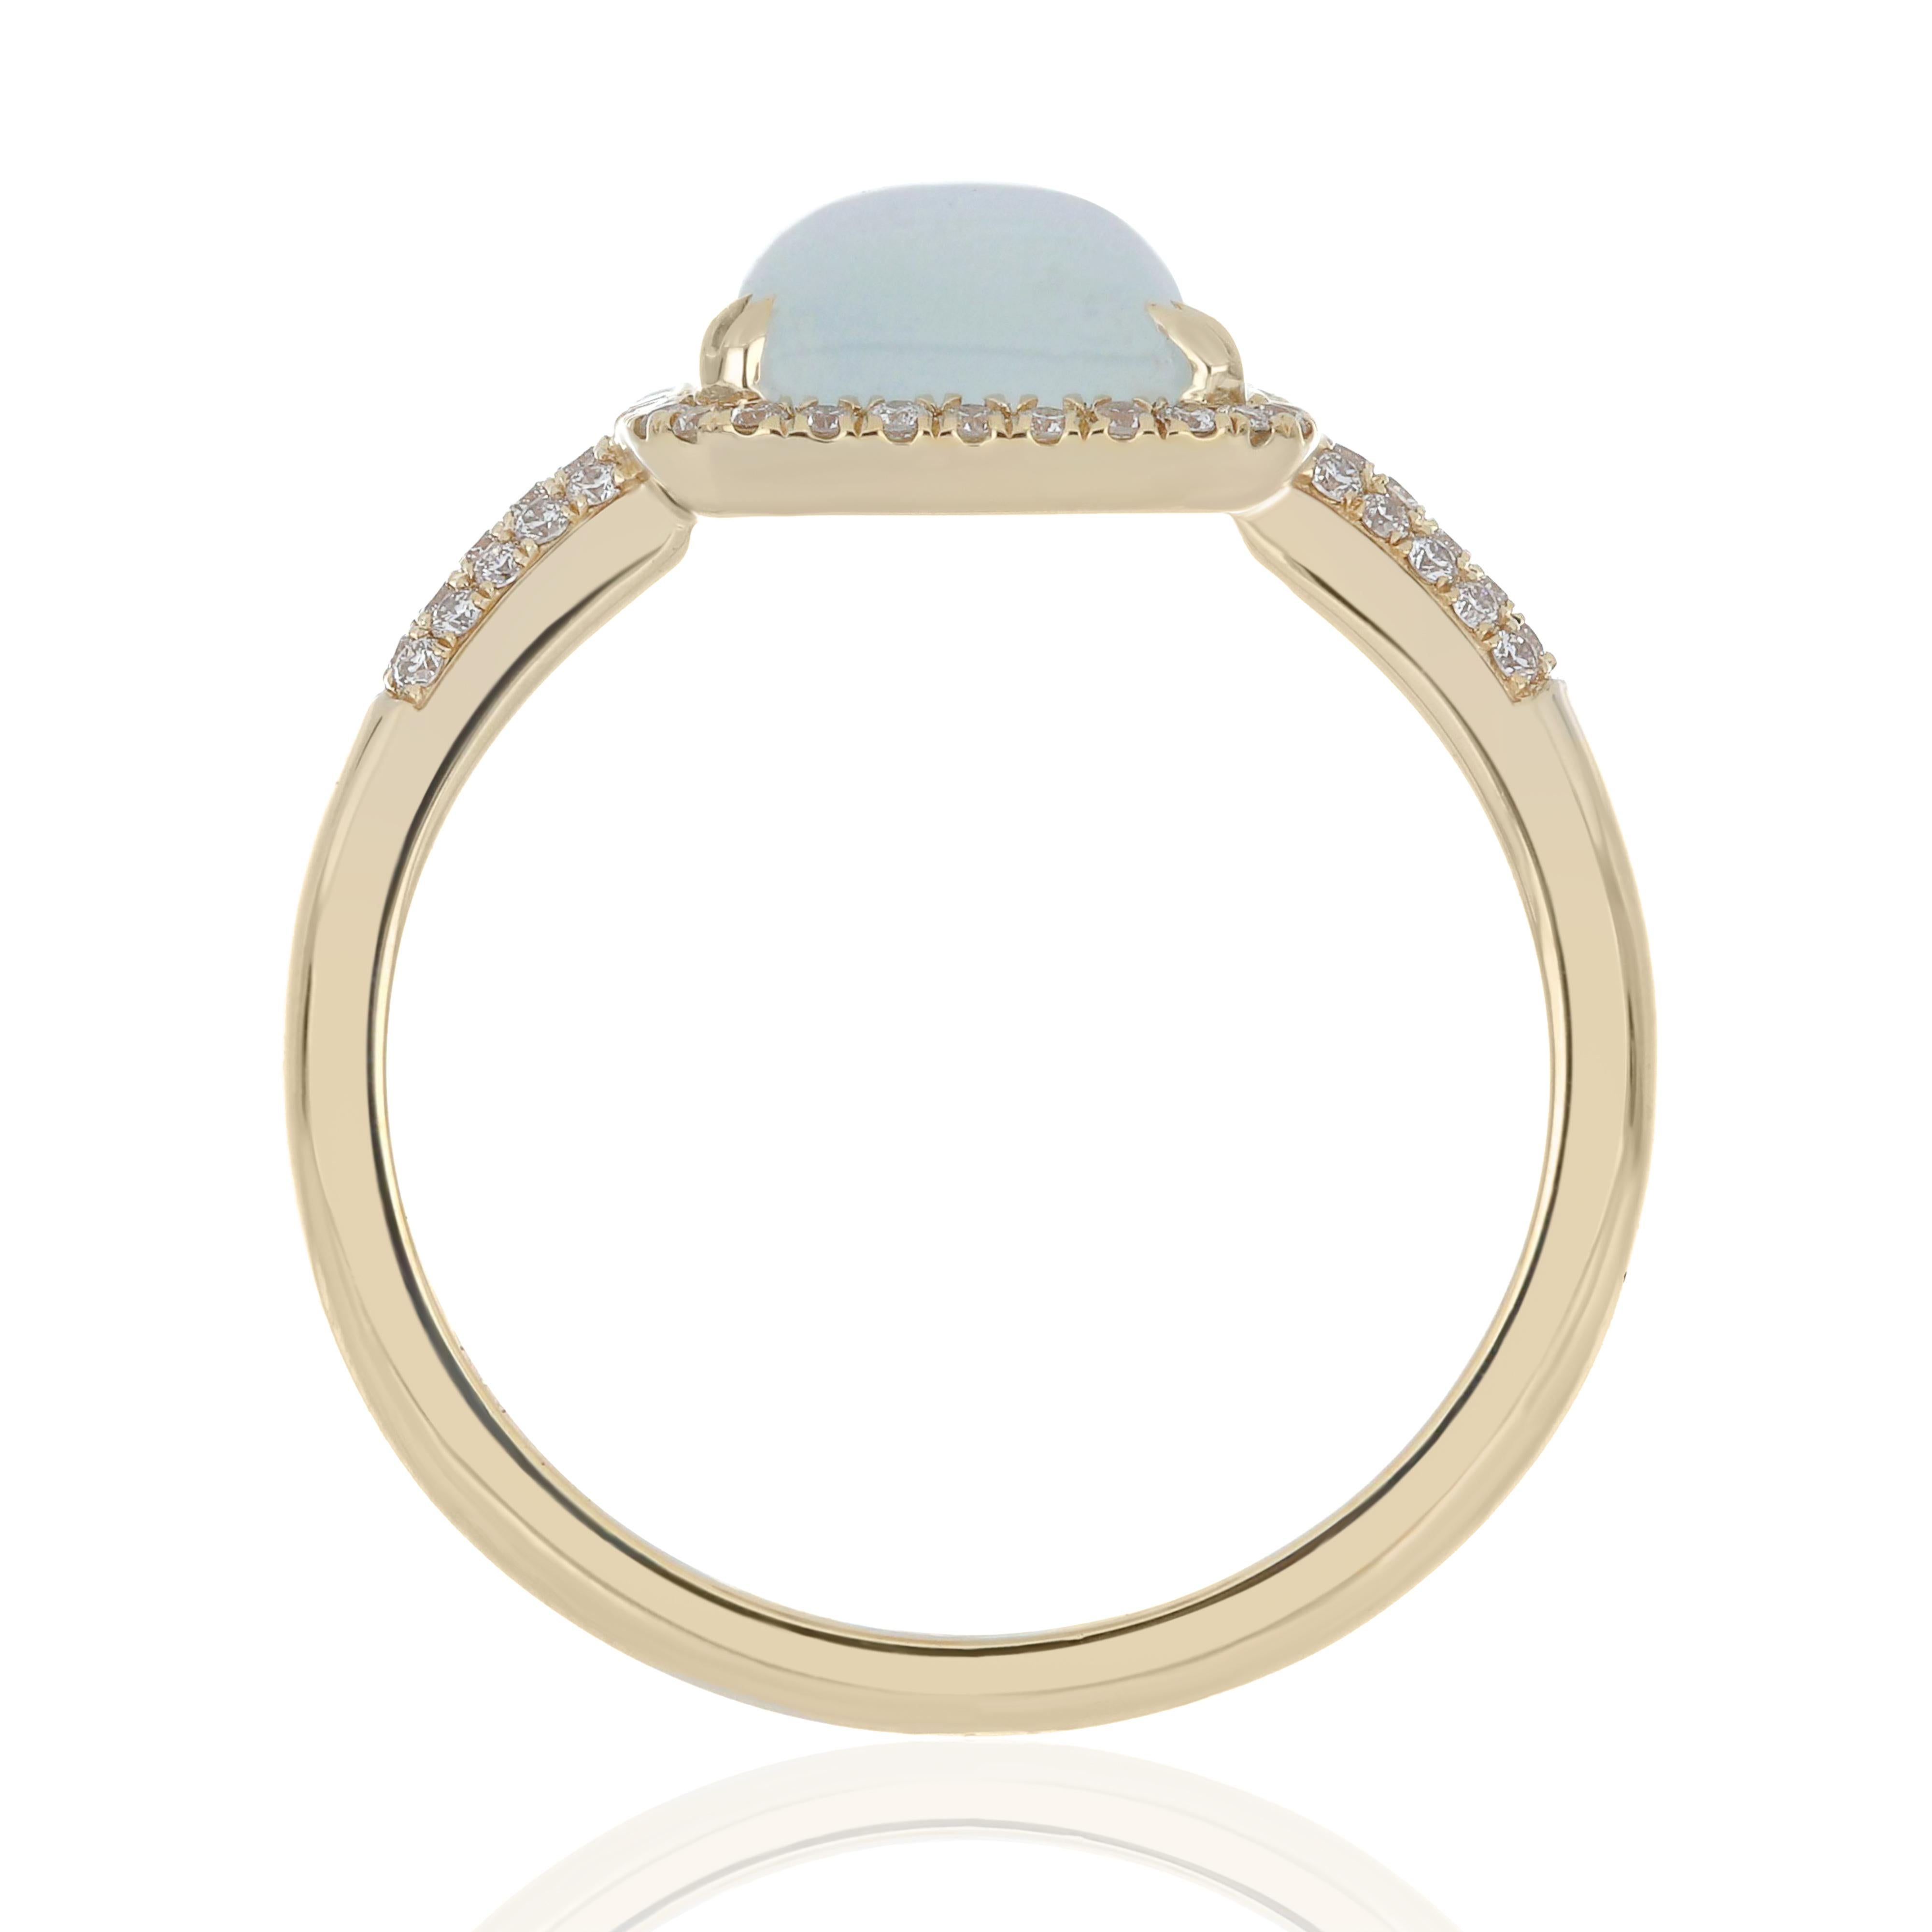 For Sale:  Milky Aqua and Diamond Studded Ring in 14 Karat Yellow Gold 5